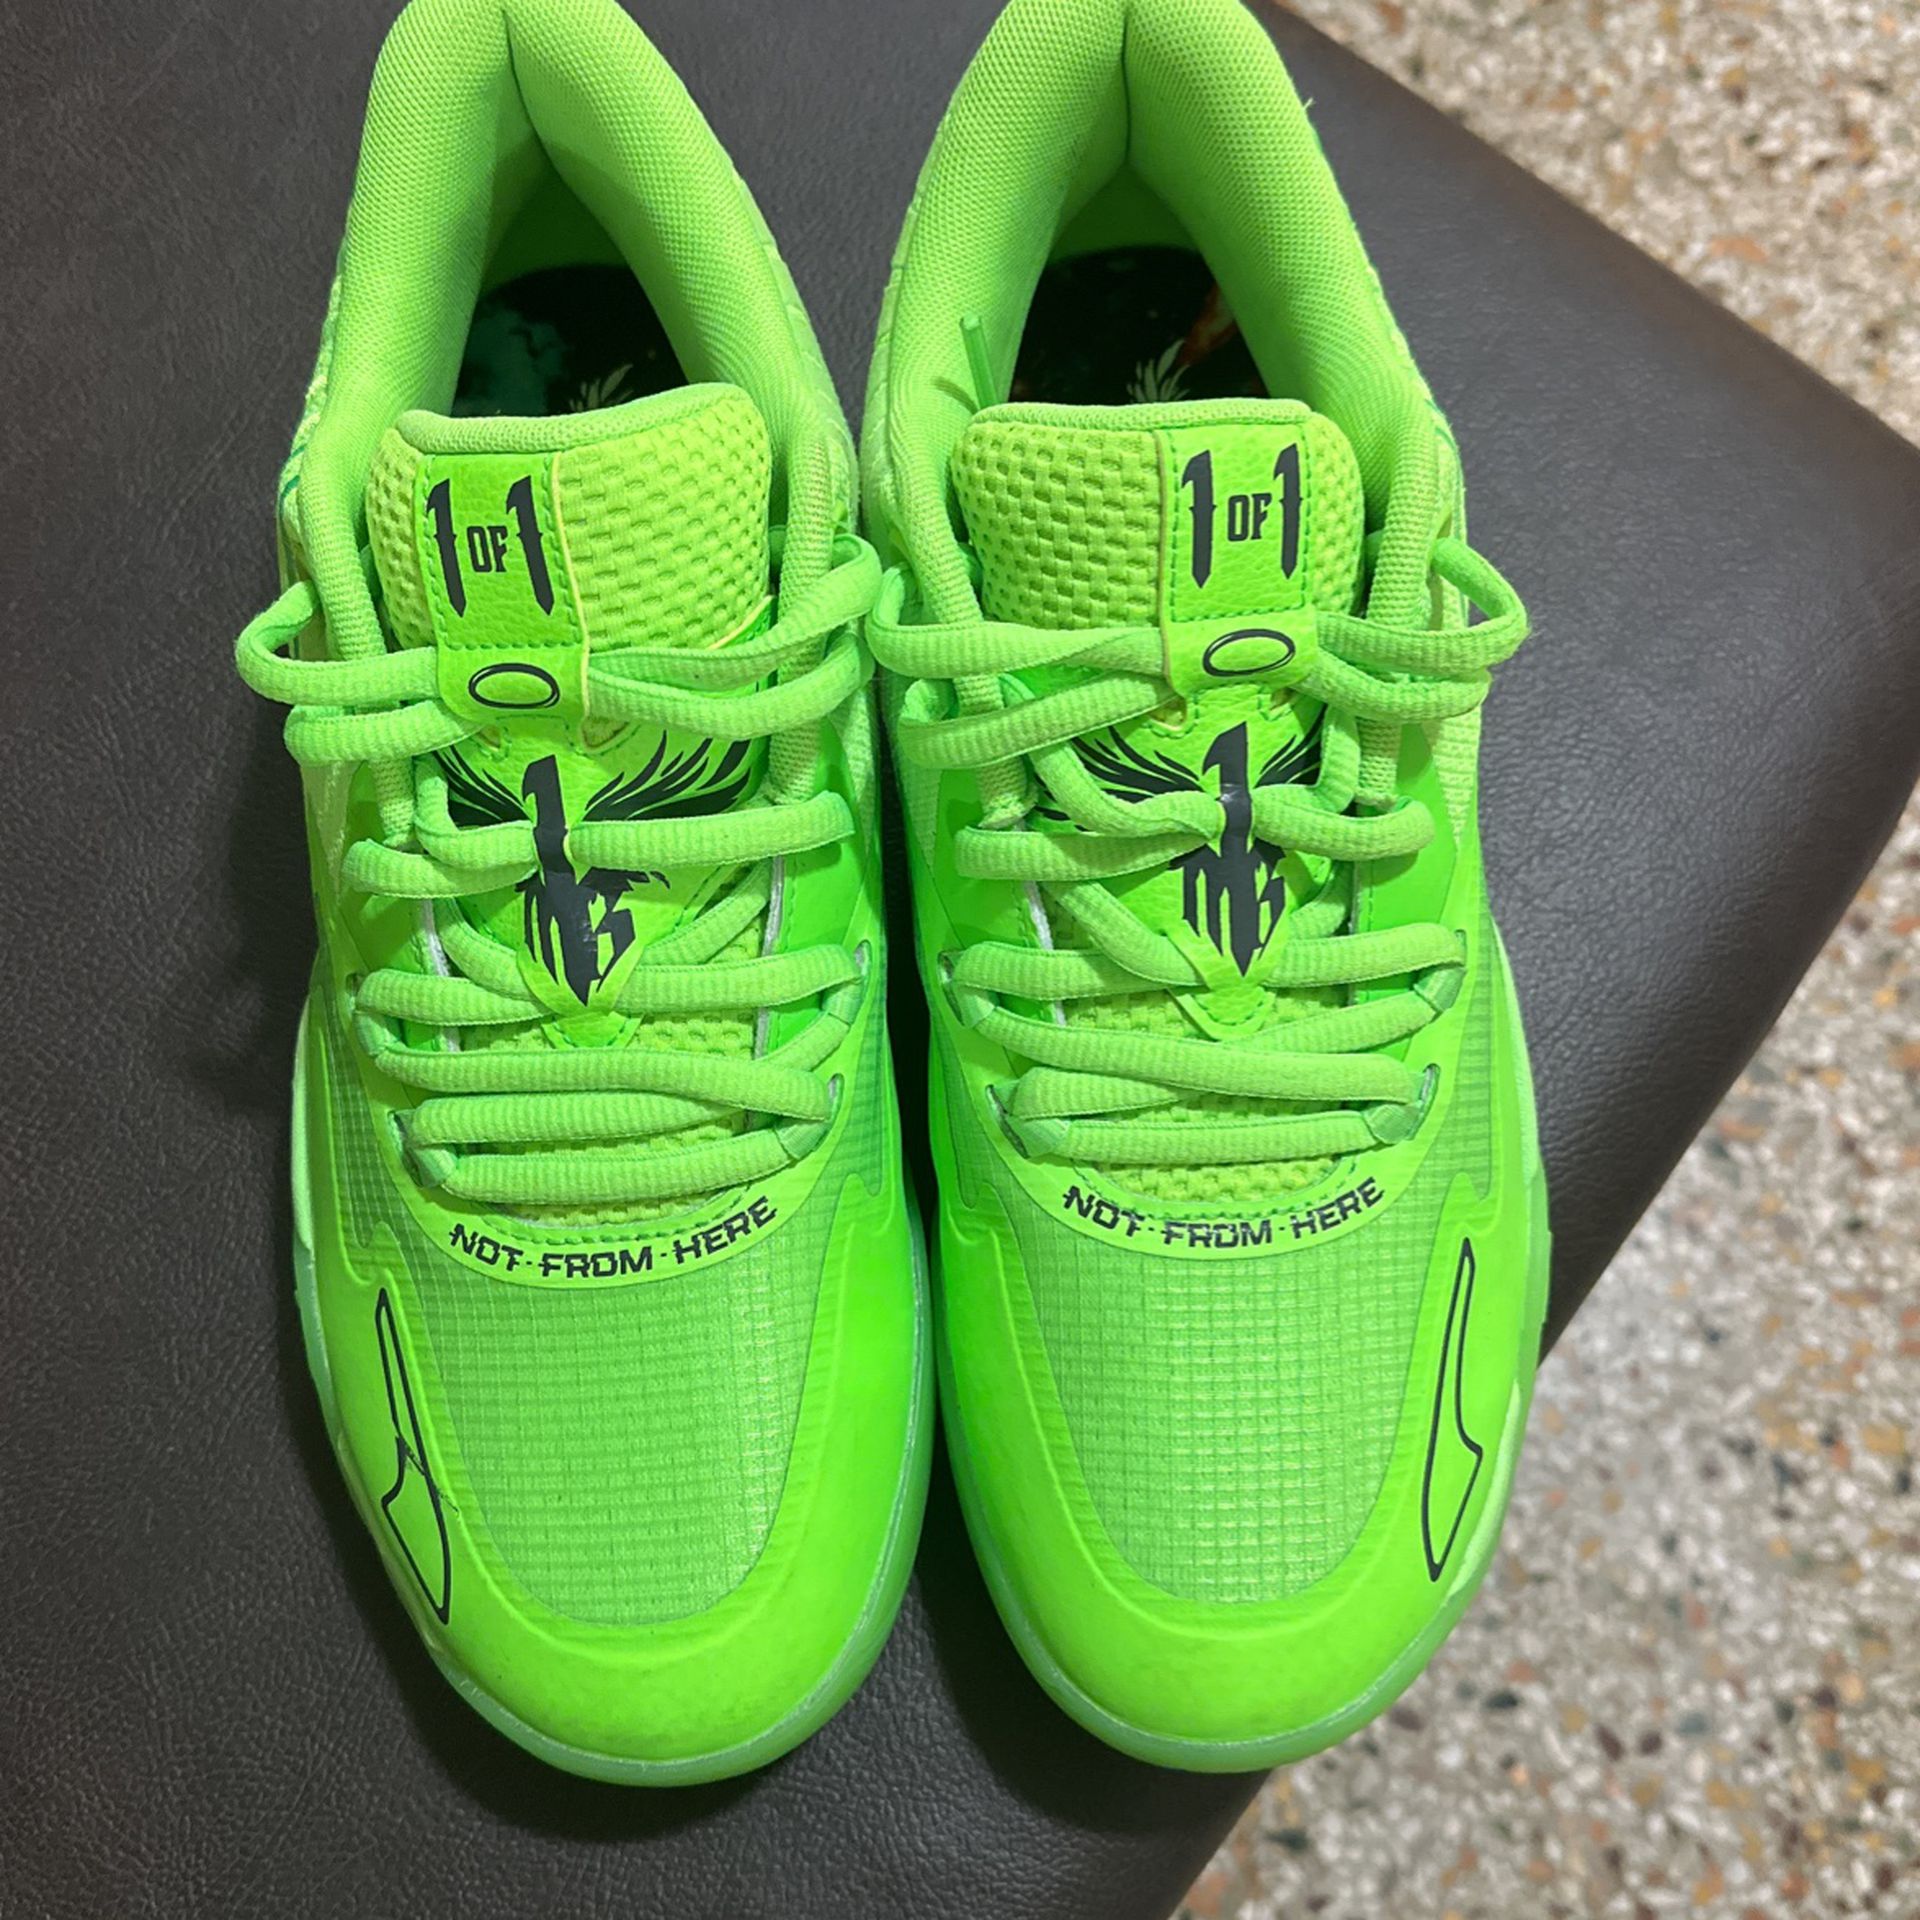 PUMA x LAMELO BALL MB.01 VOLT SIZE 9 (used) for Sale in Miami, FL - OfferUp